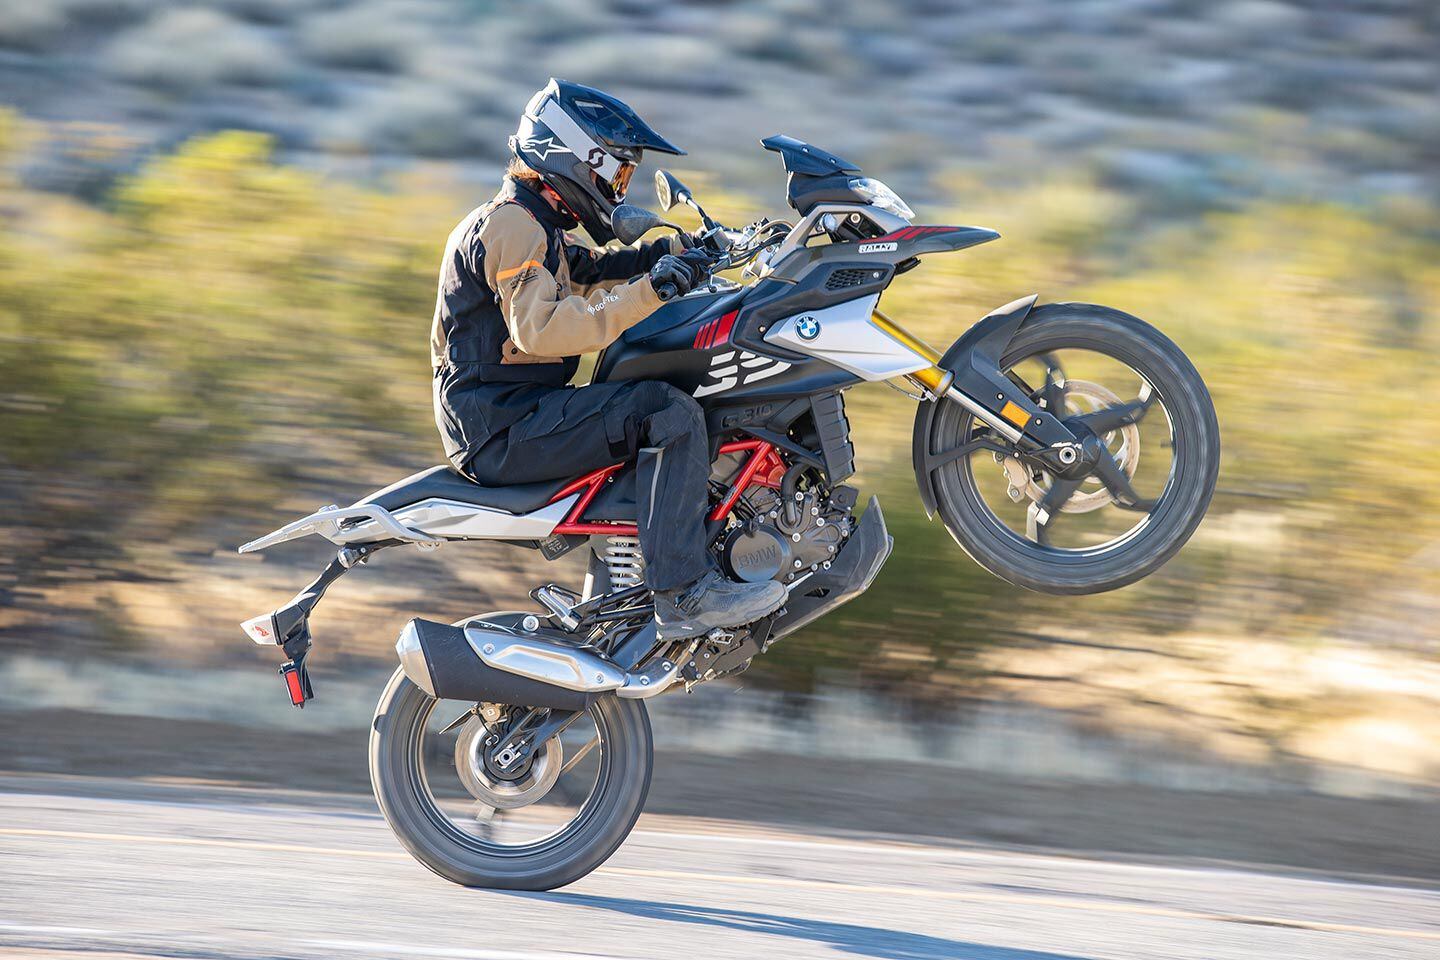 Yes, the G 310 GS is certainly capable of wheelies.